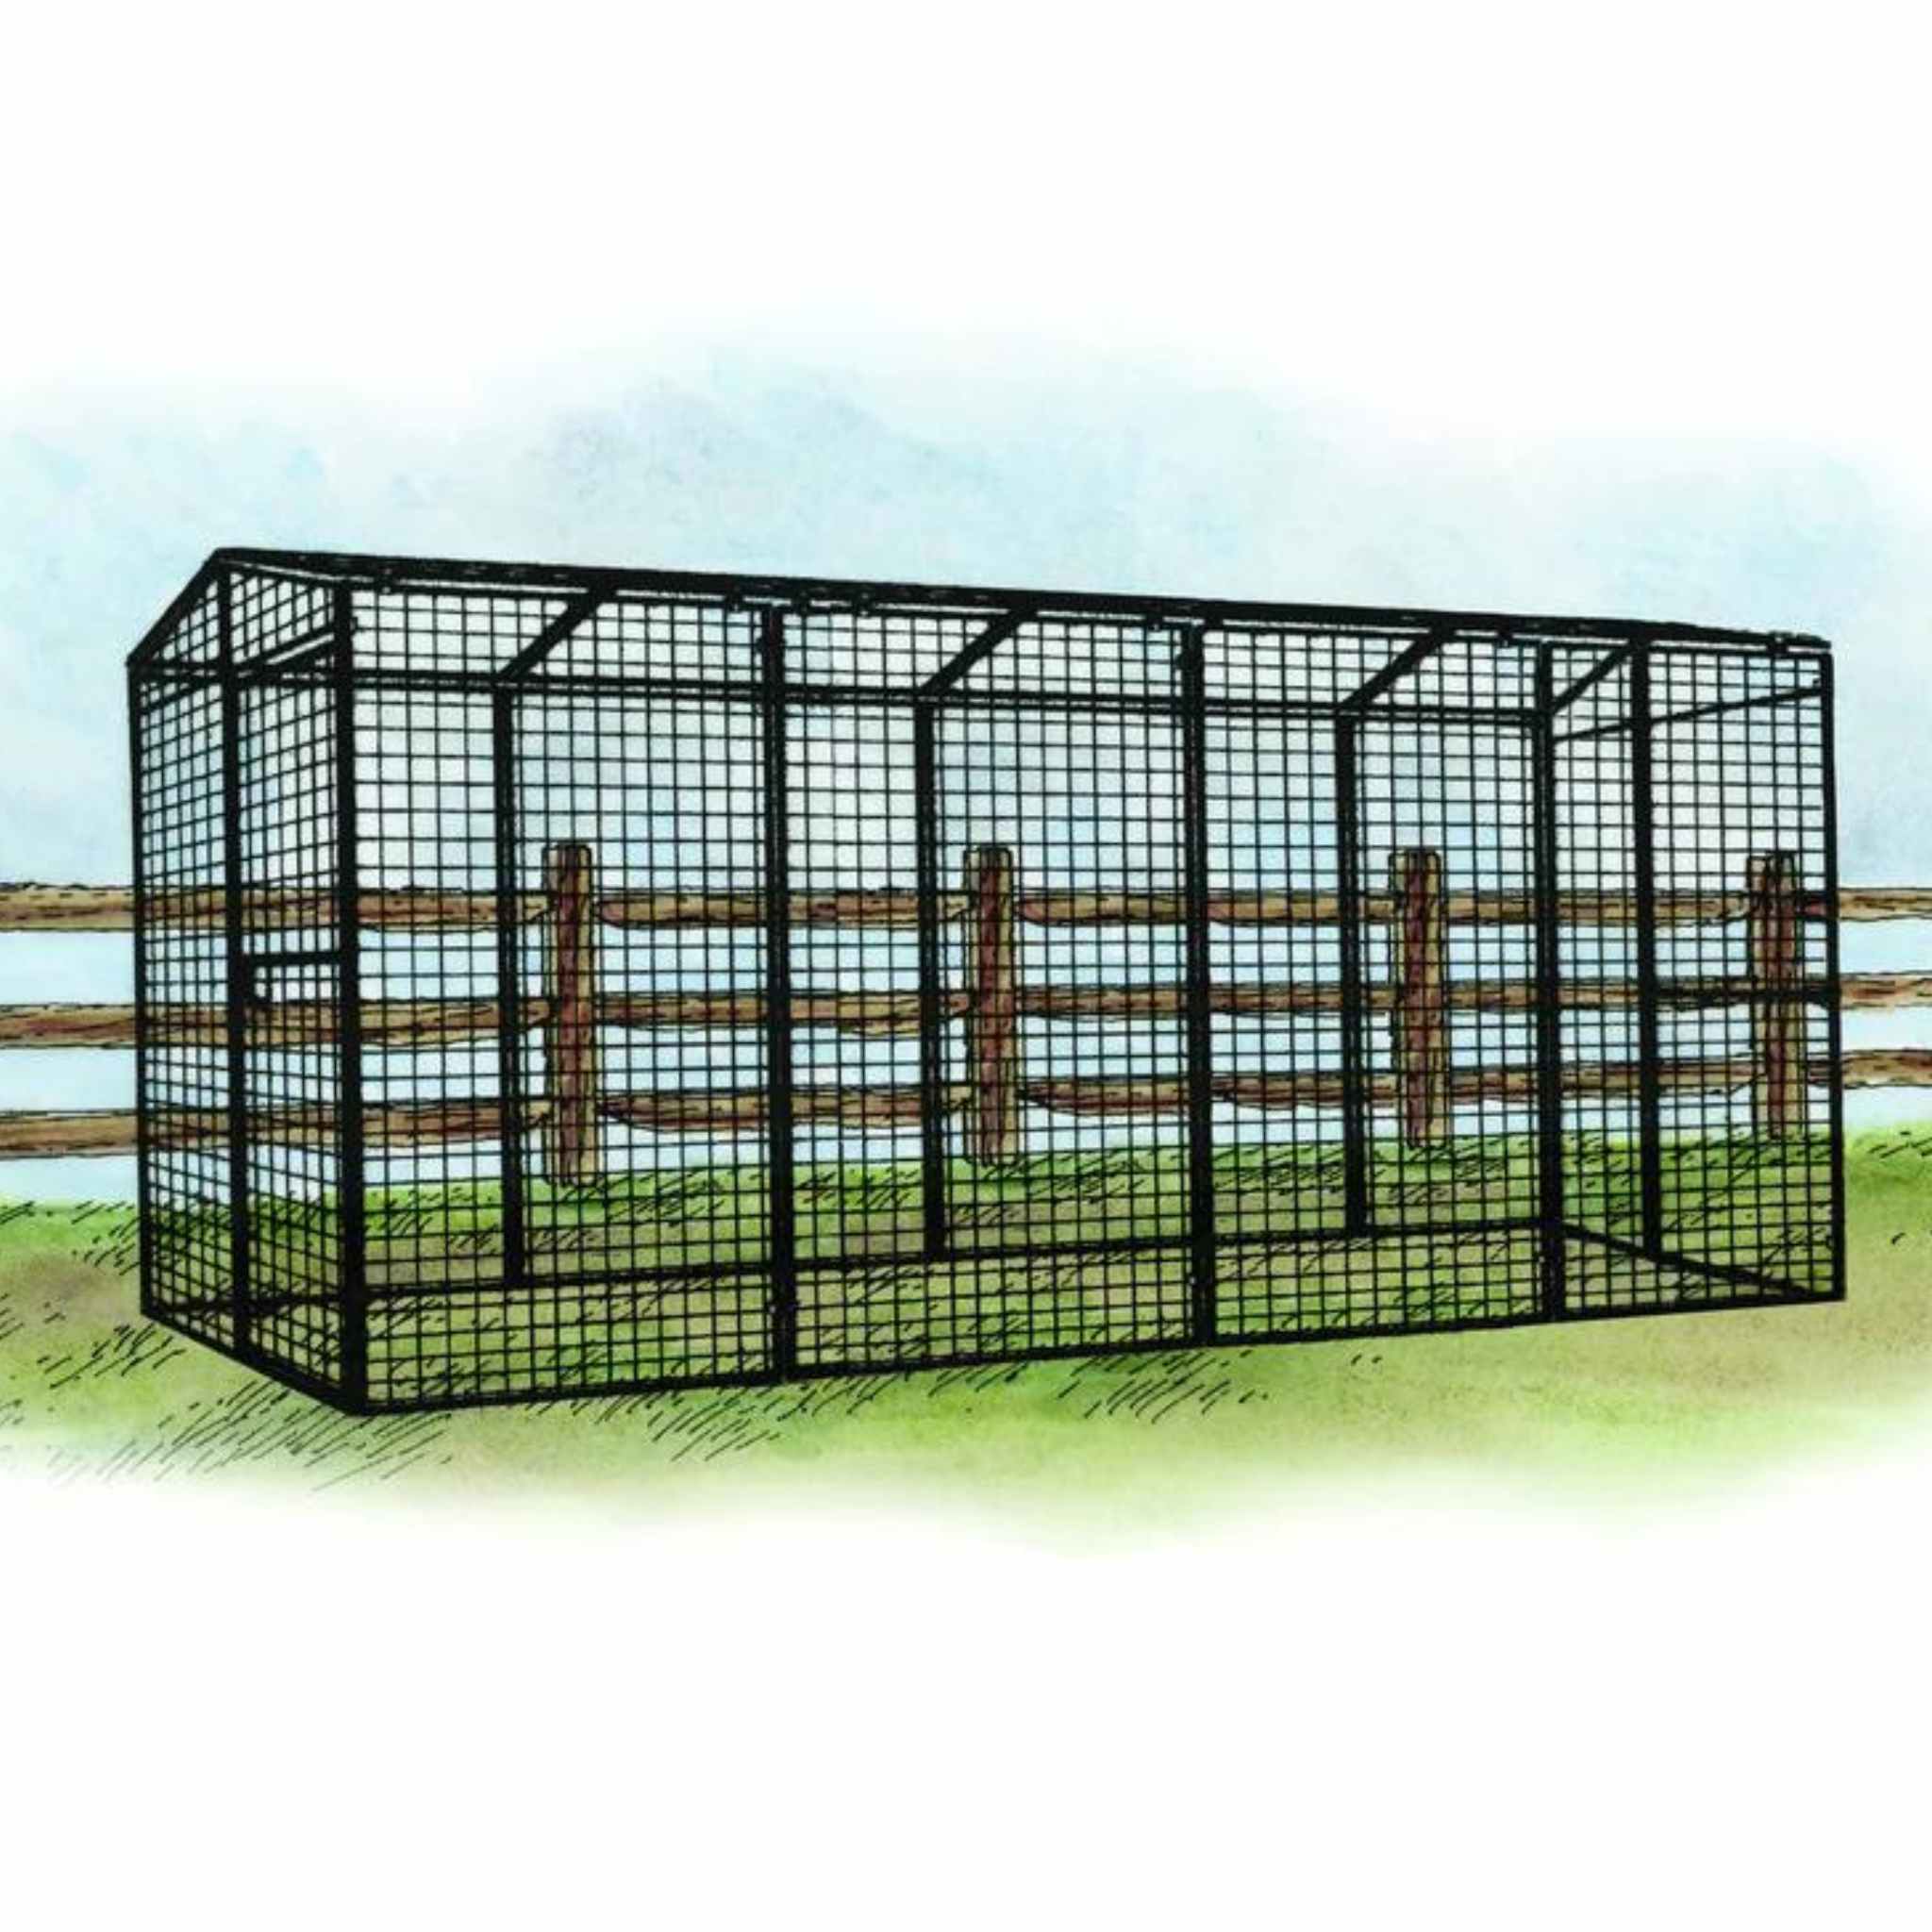 Hatching Time OverEZ. Illustration of 15ft chicken run can be seen in image.